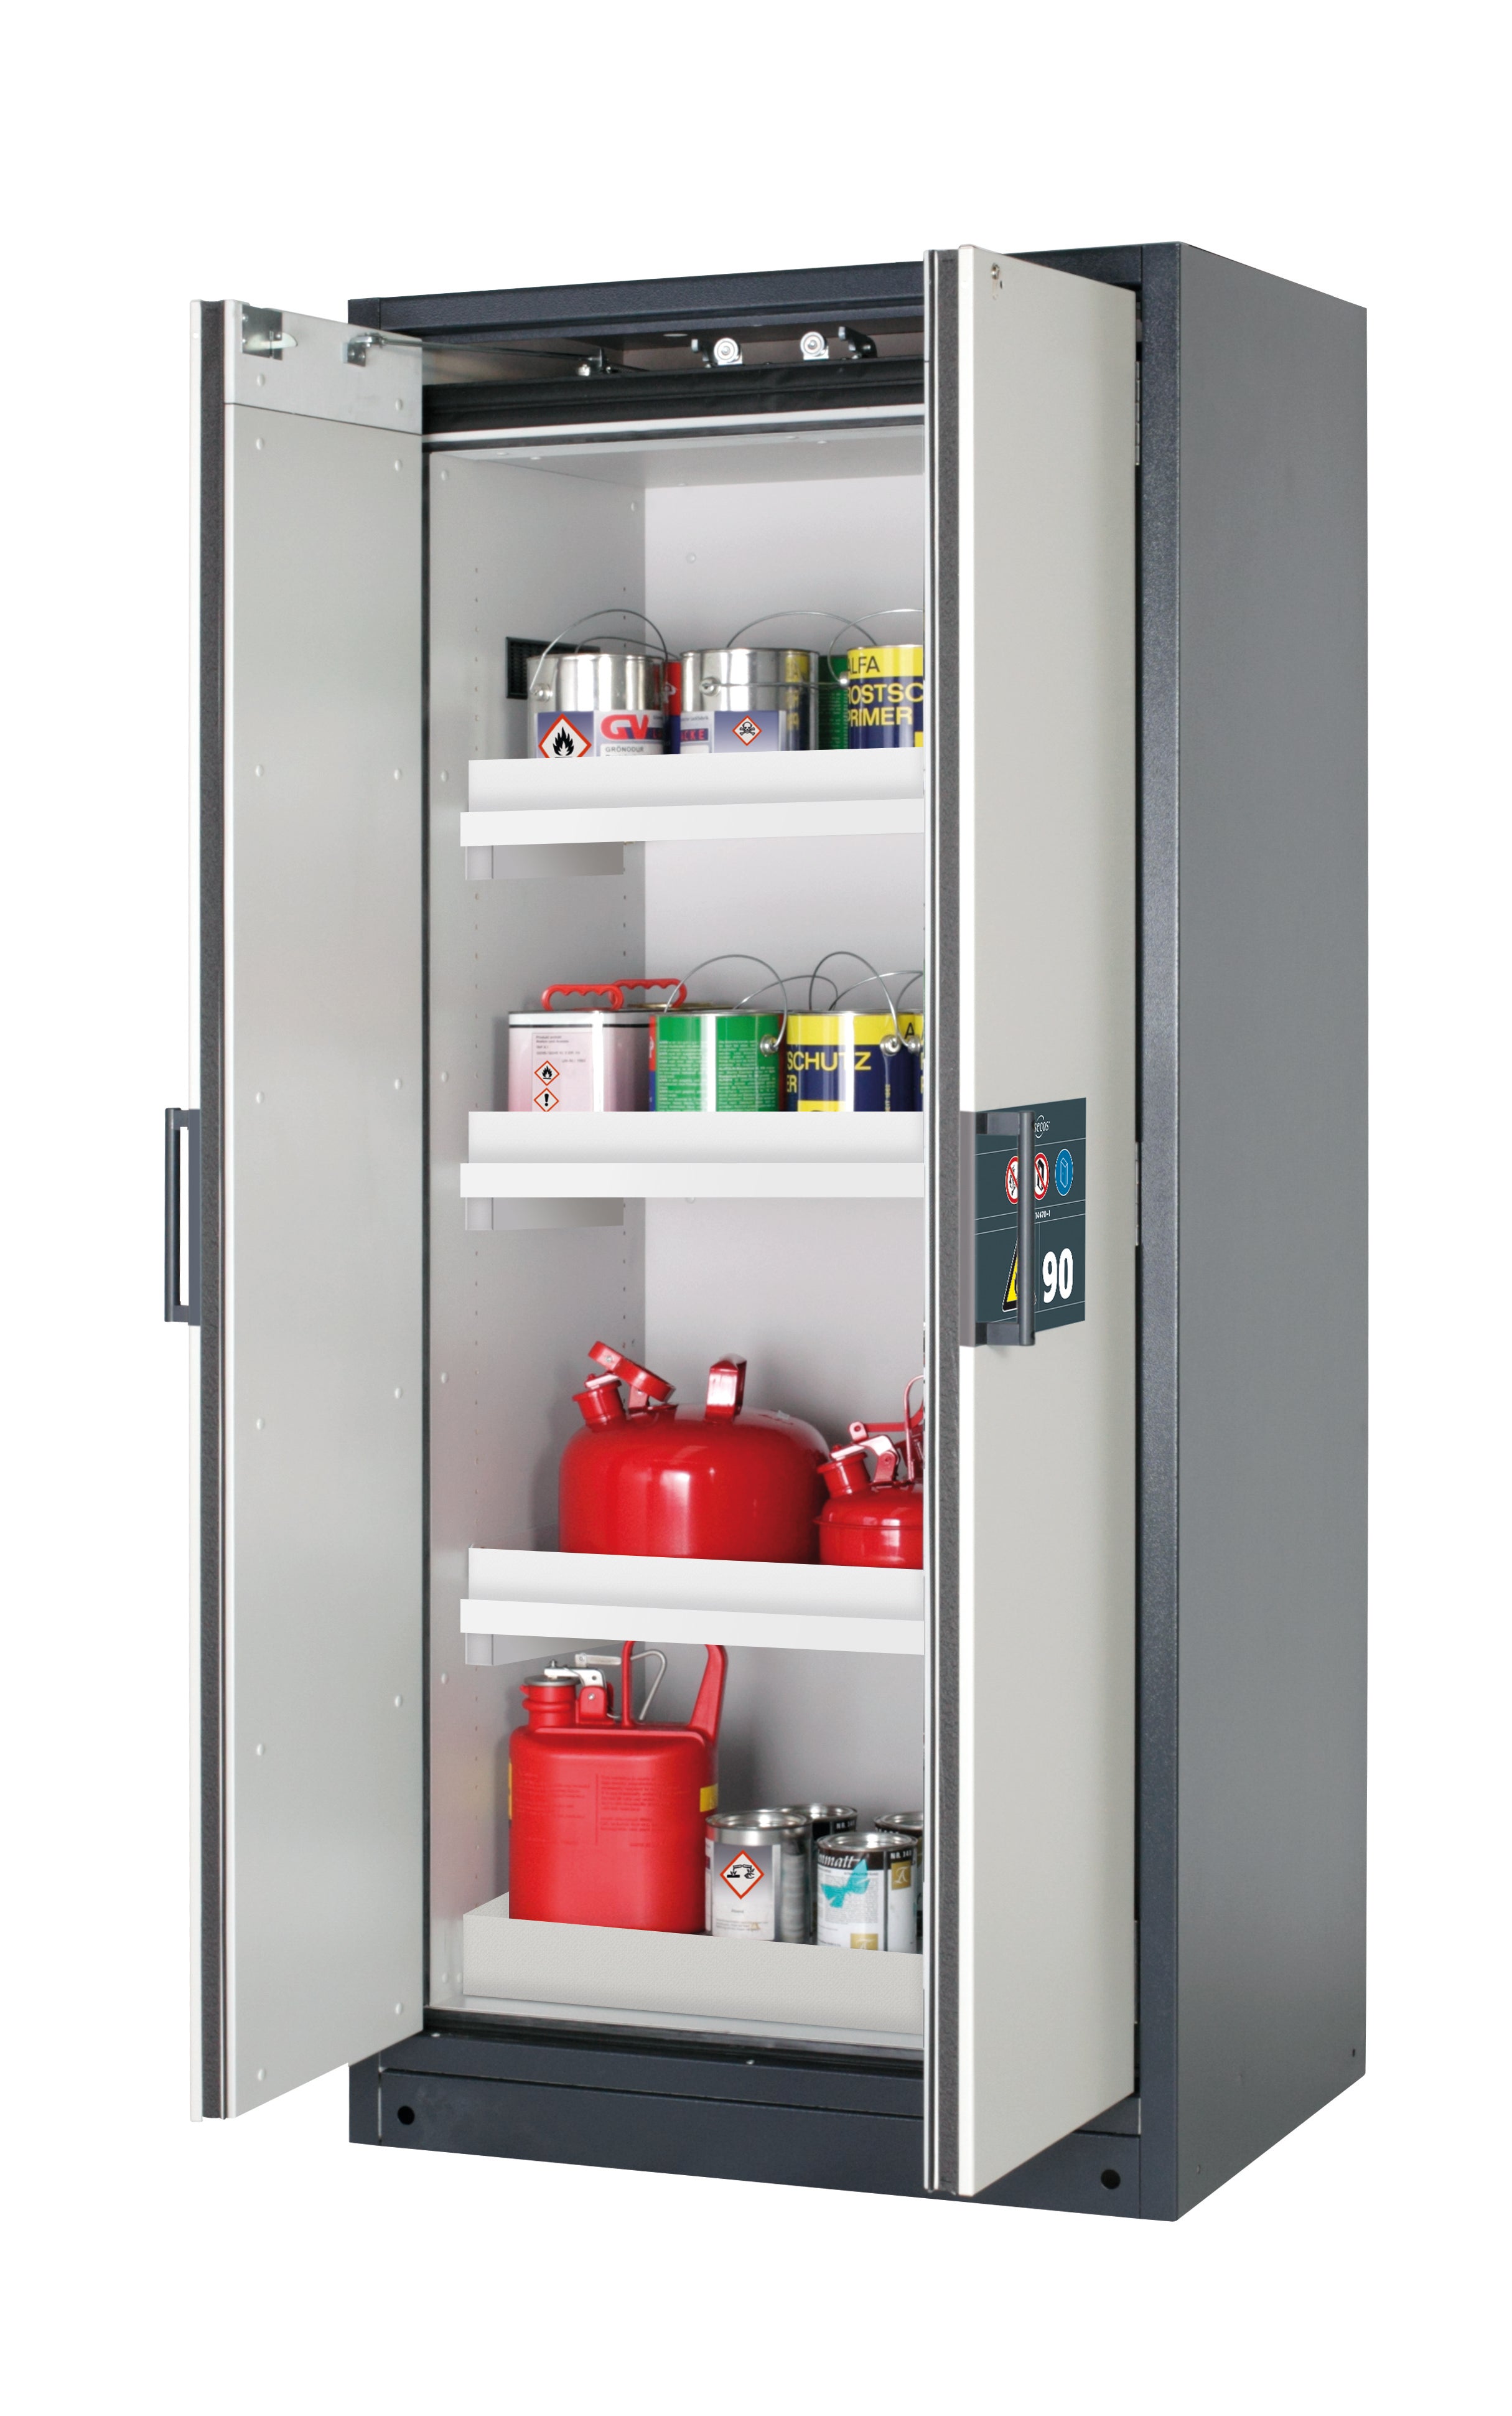 Type 90 safety storage cabinet Q-CLASSIC-90 model Q90.195.090 in light grey RAL 7035 with 3x tray shelf (standard) (polypropylene),